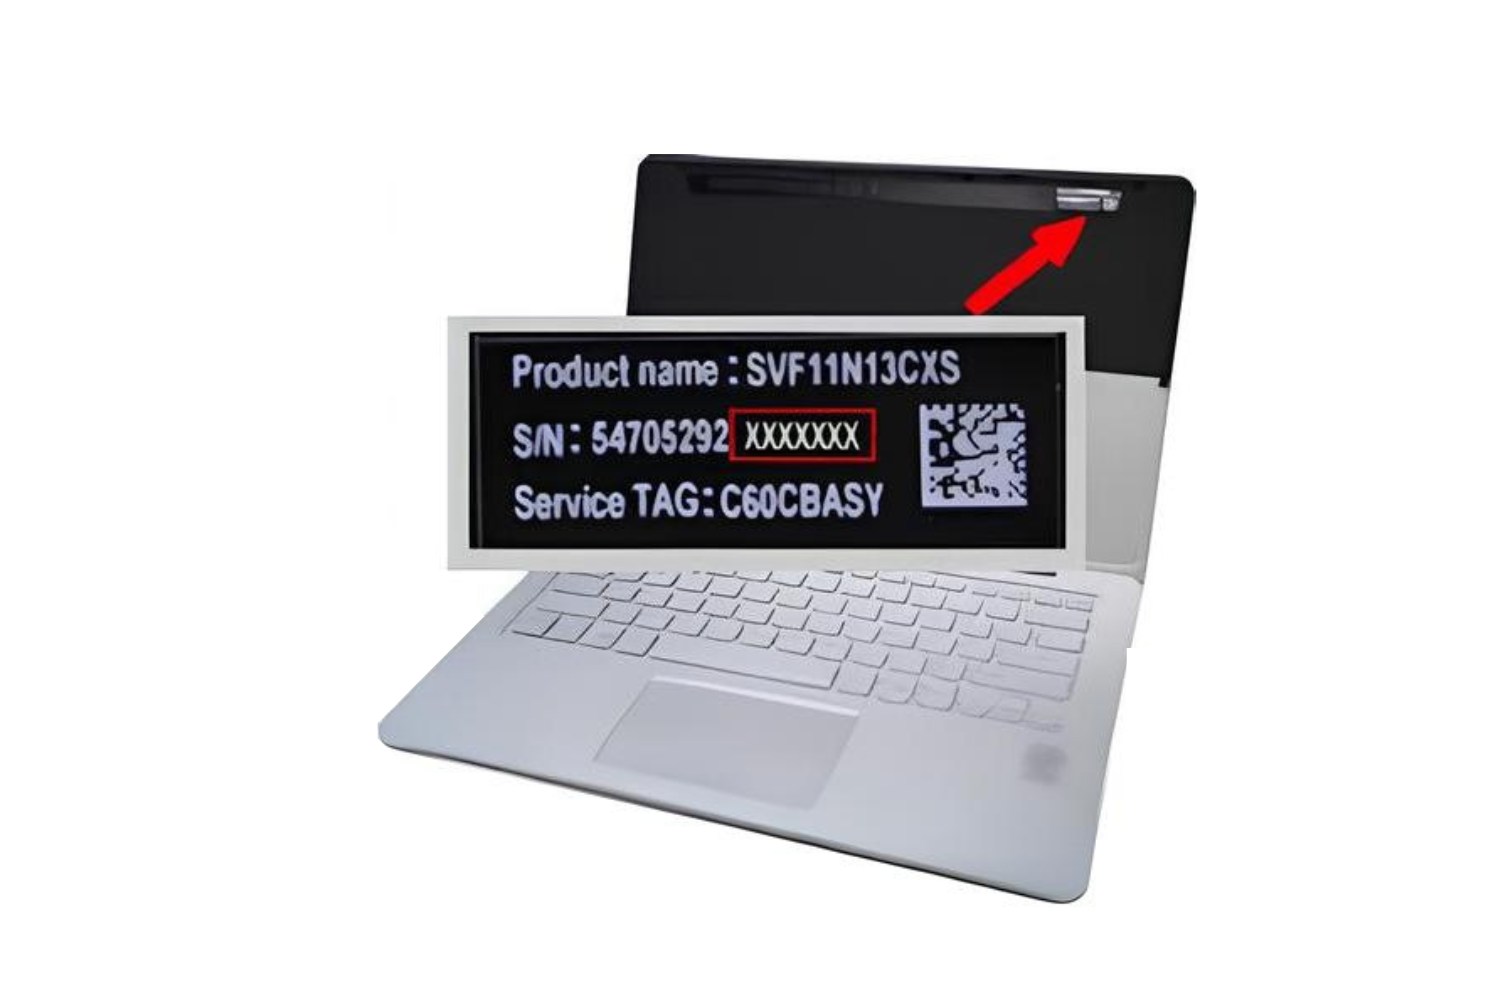 Where To Find Sony Ultrabook Model Number